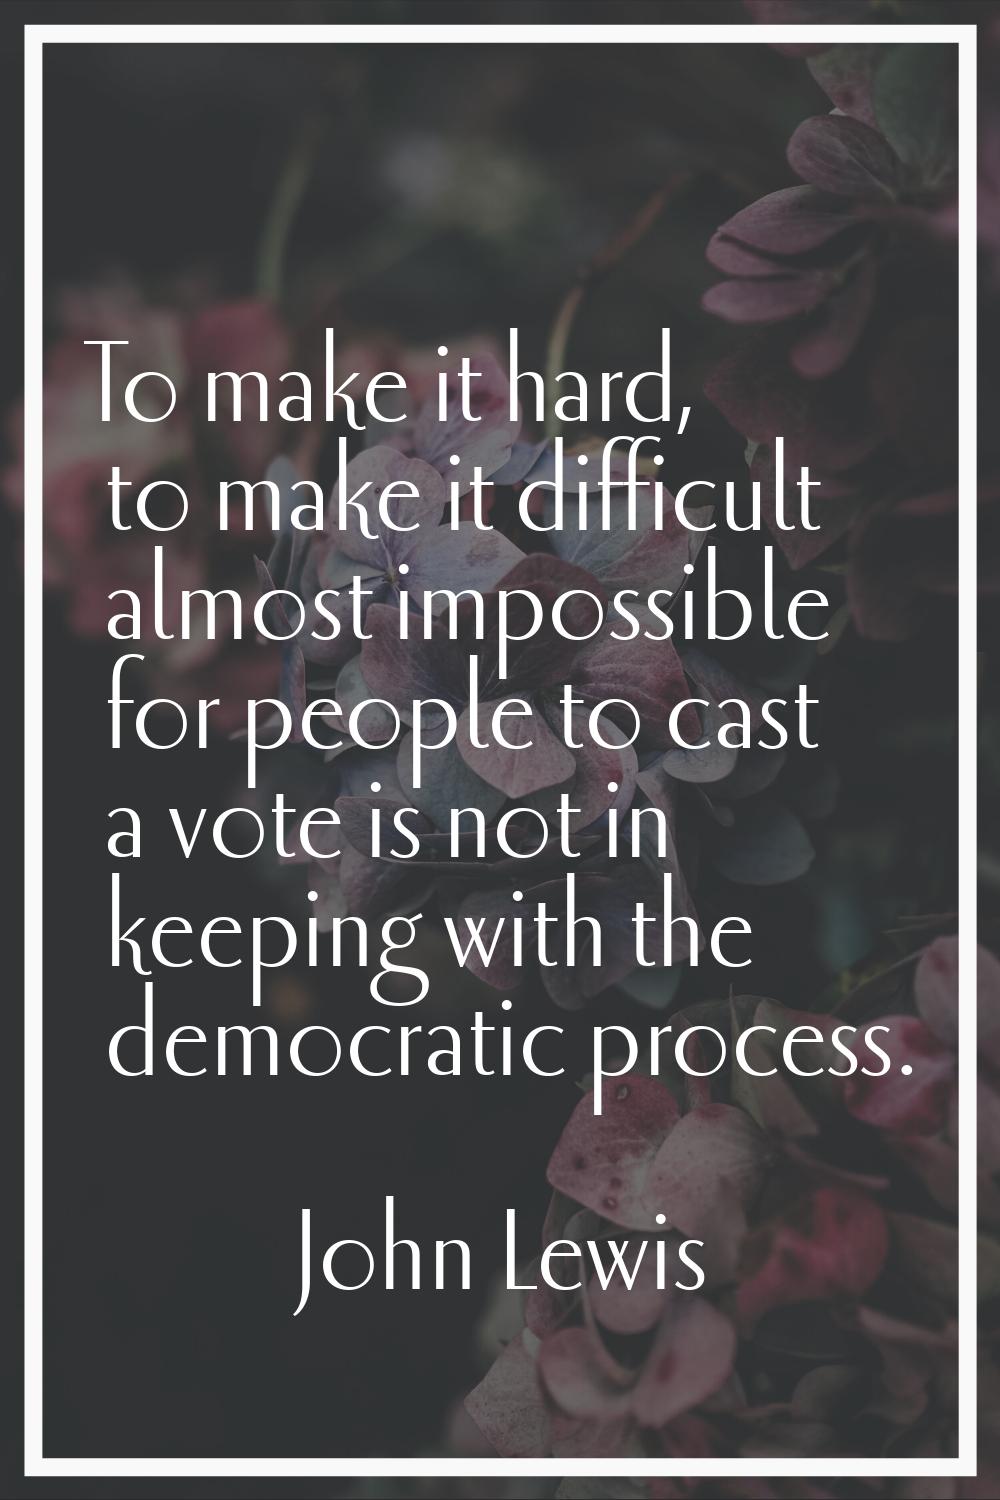 To make it hard, to make it difficult almost impossible for people to cast a vote is not in keeping